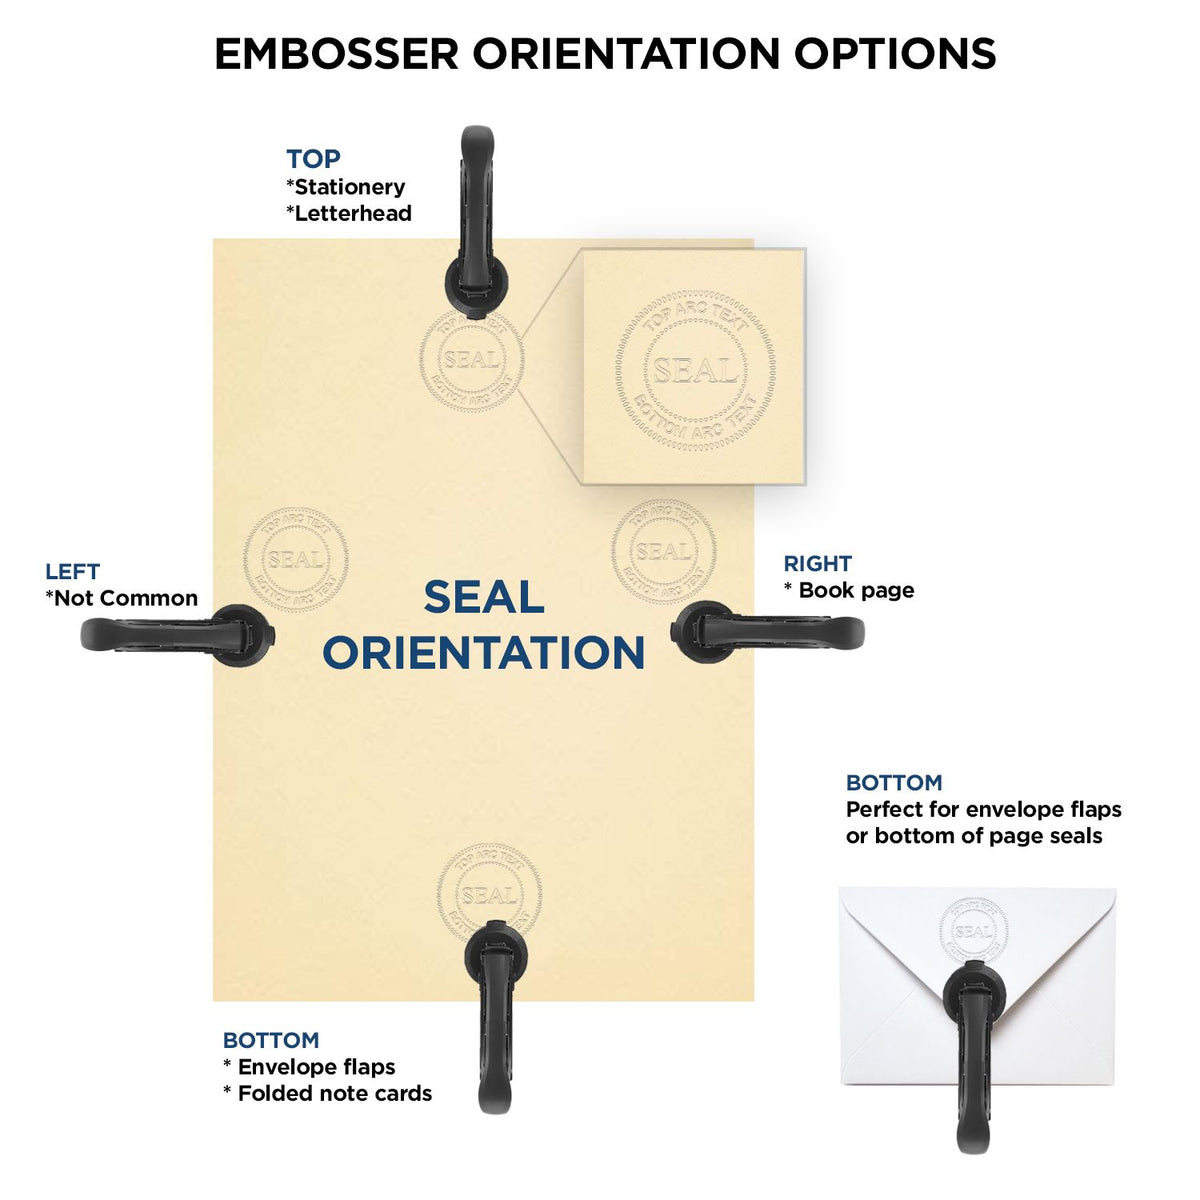 An infographic for the Heavy Duty Cast Iron Idaho Engineer Seal Embosser showing embosser orientation, this is showing examples of a top, bottom, right and left insert.